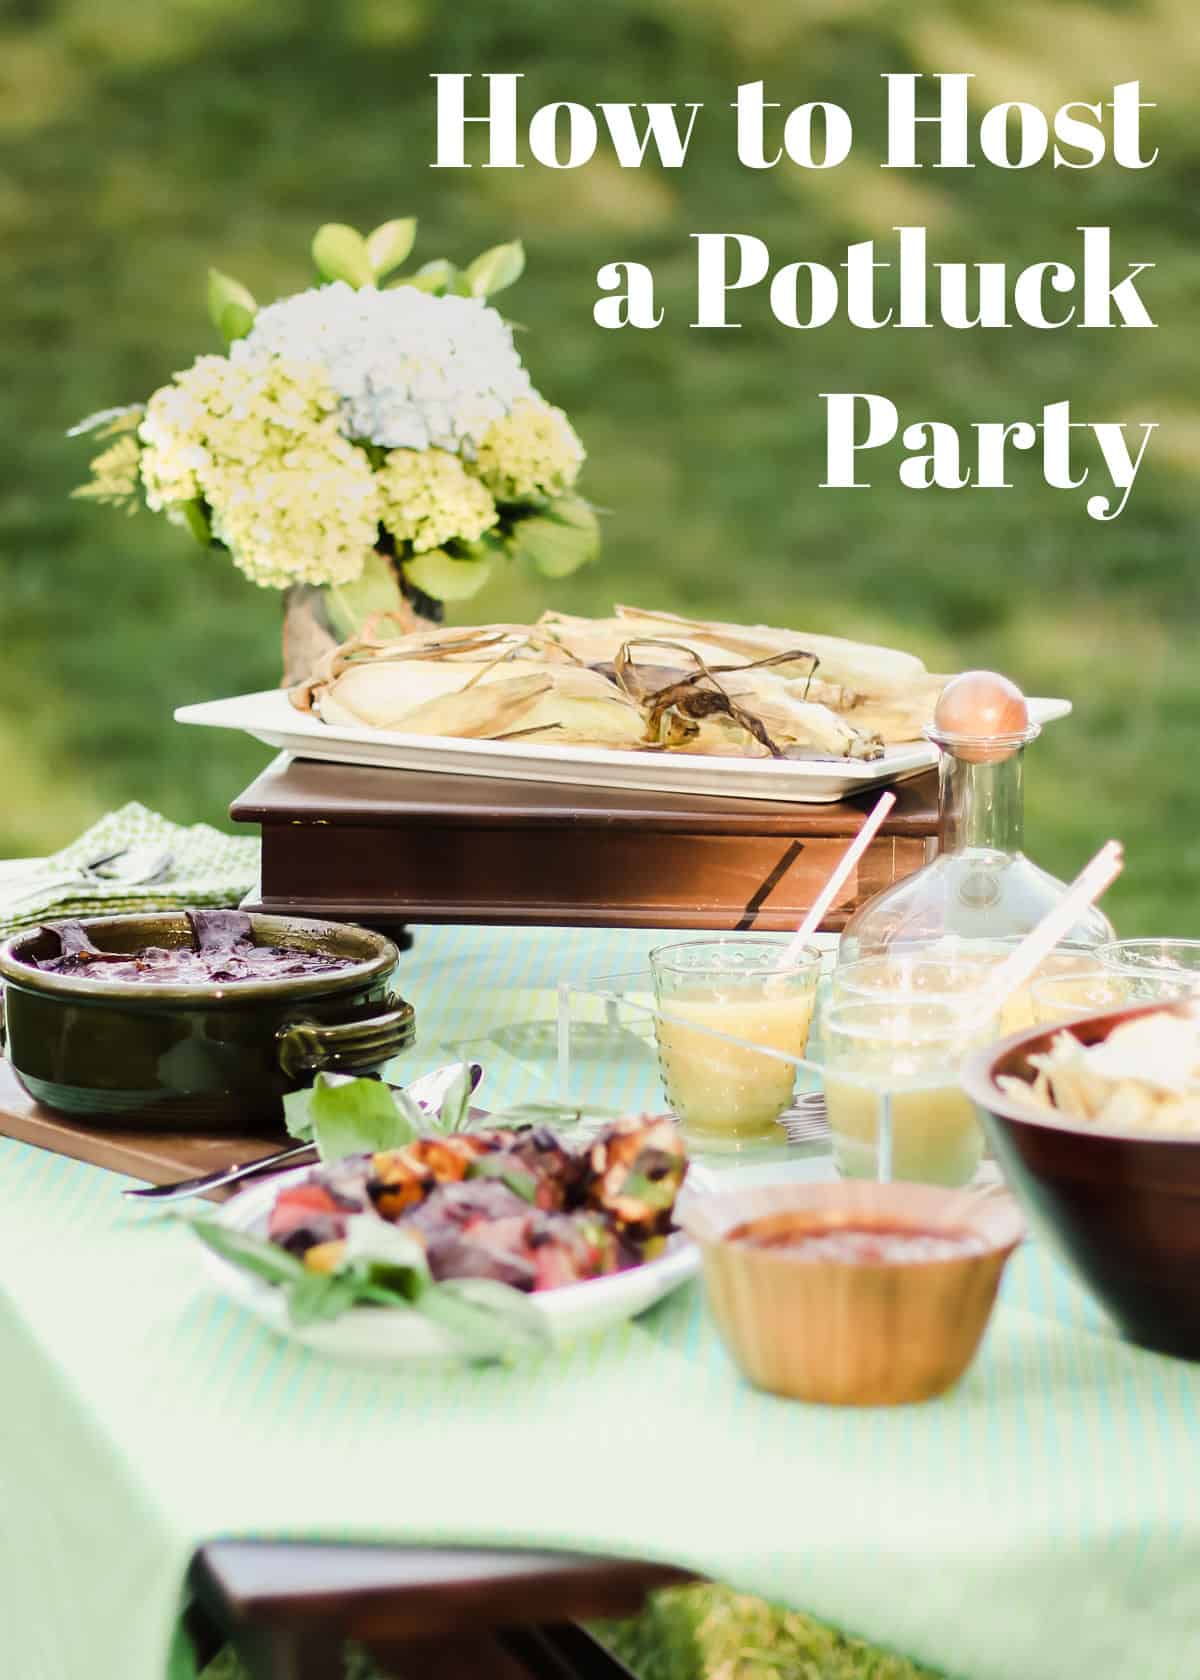 How to Host a Potluck Party